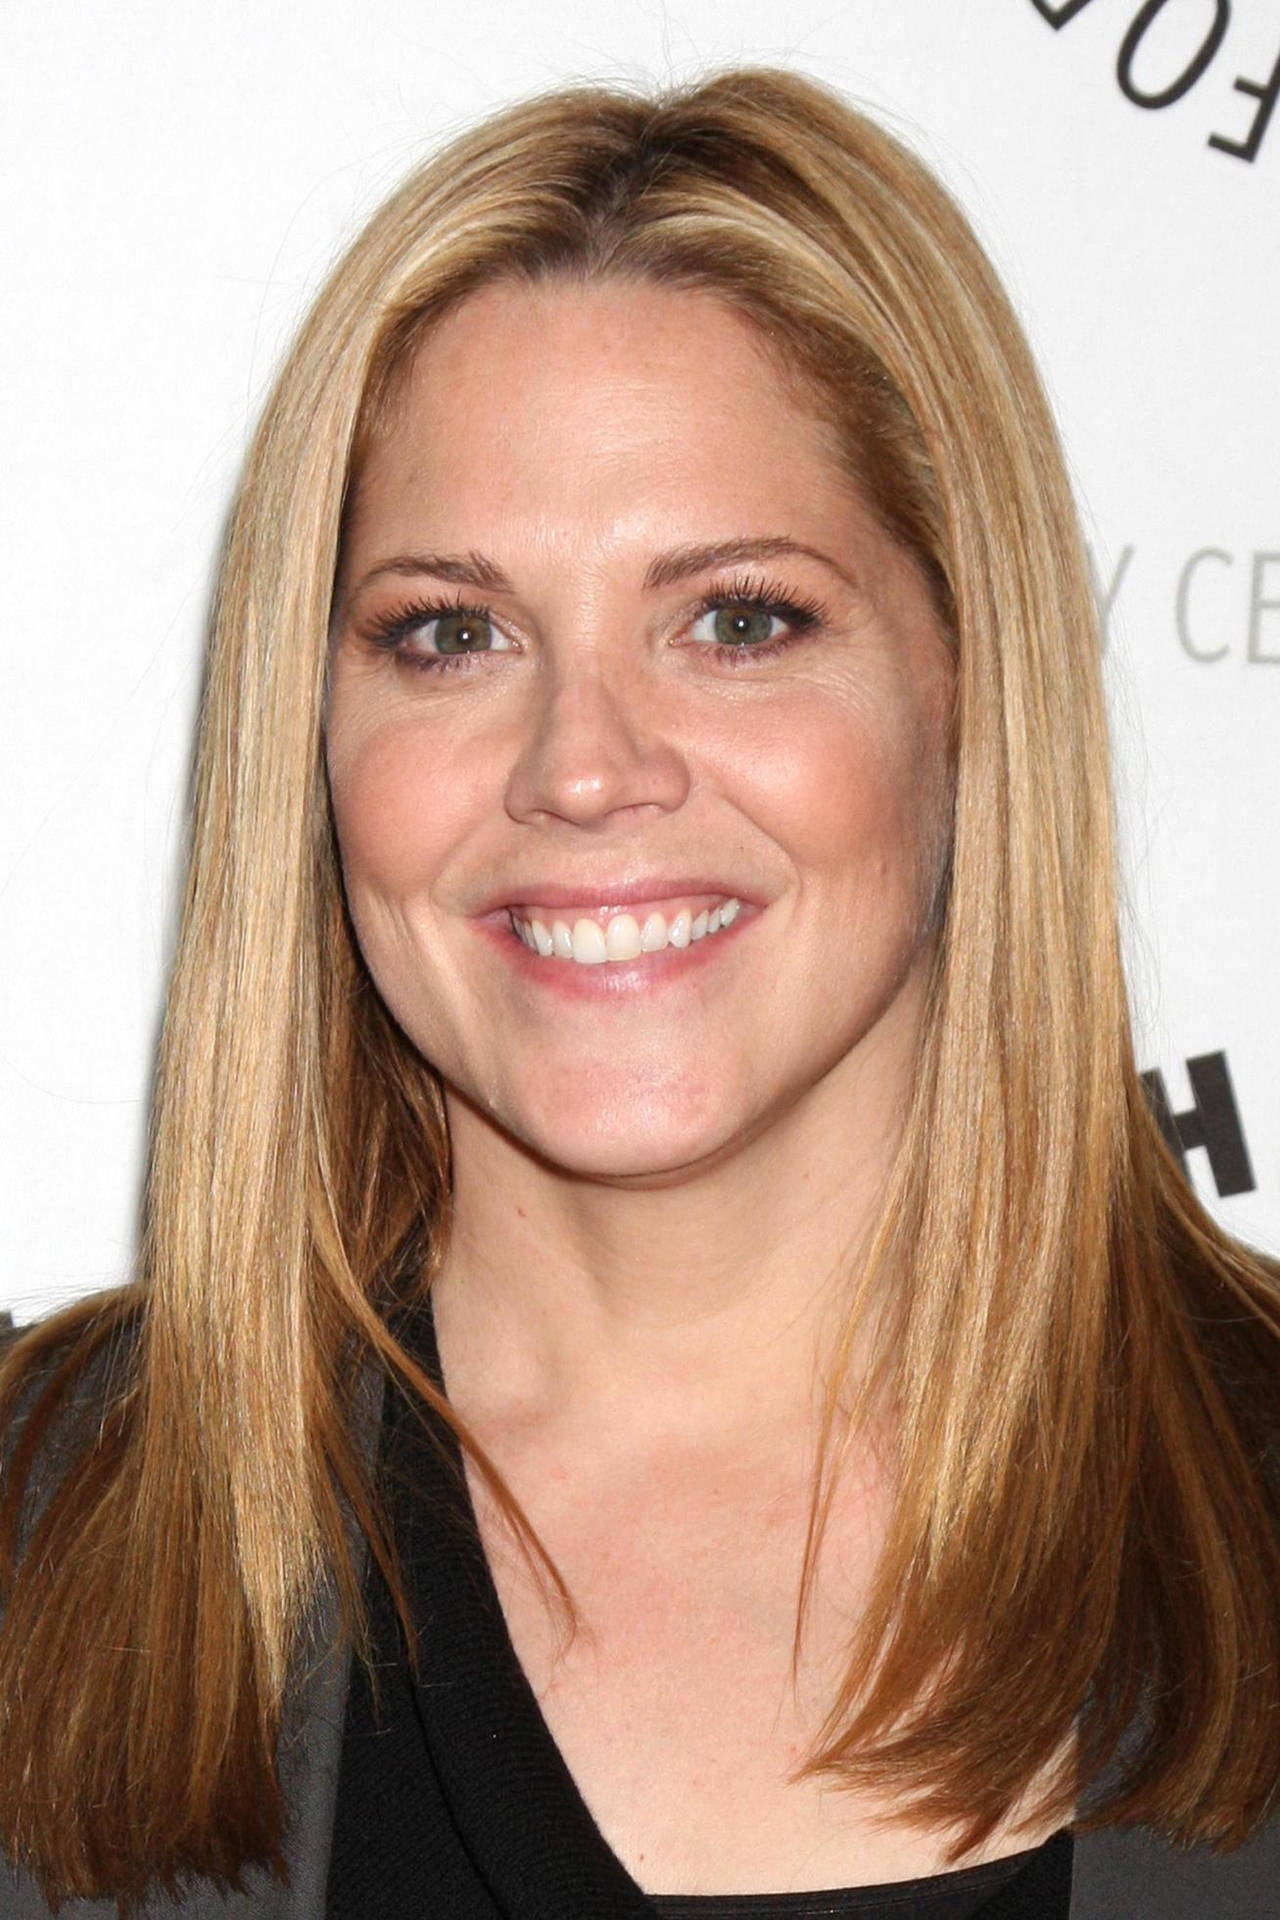 Mary McCormack in "In Plain Sight" Wallpaper